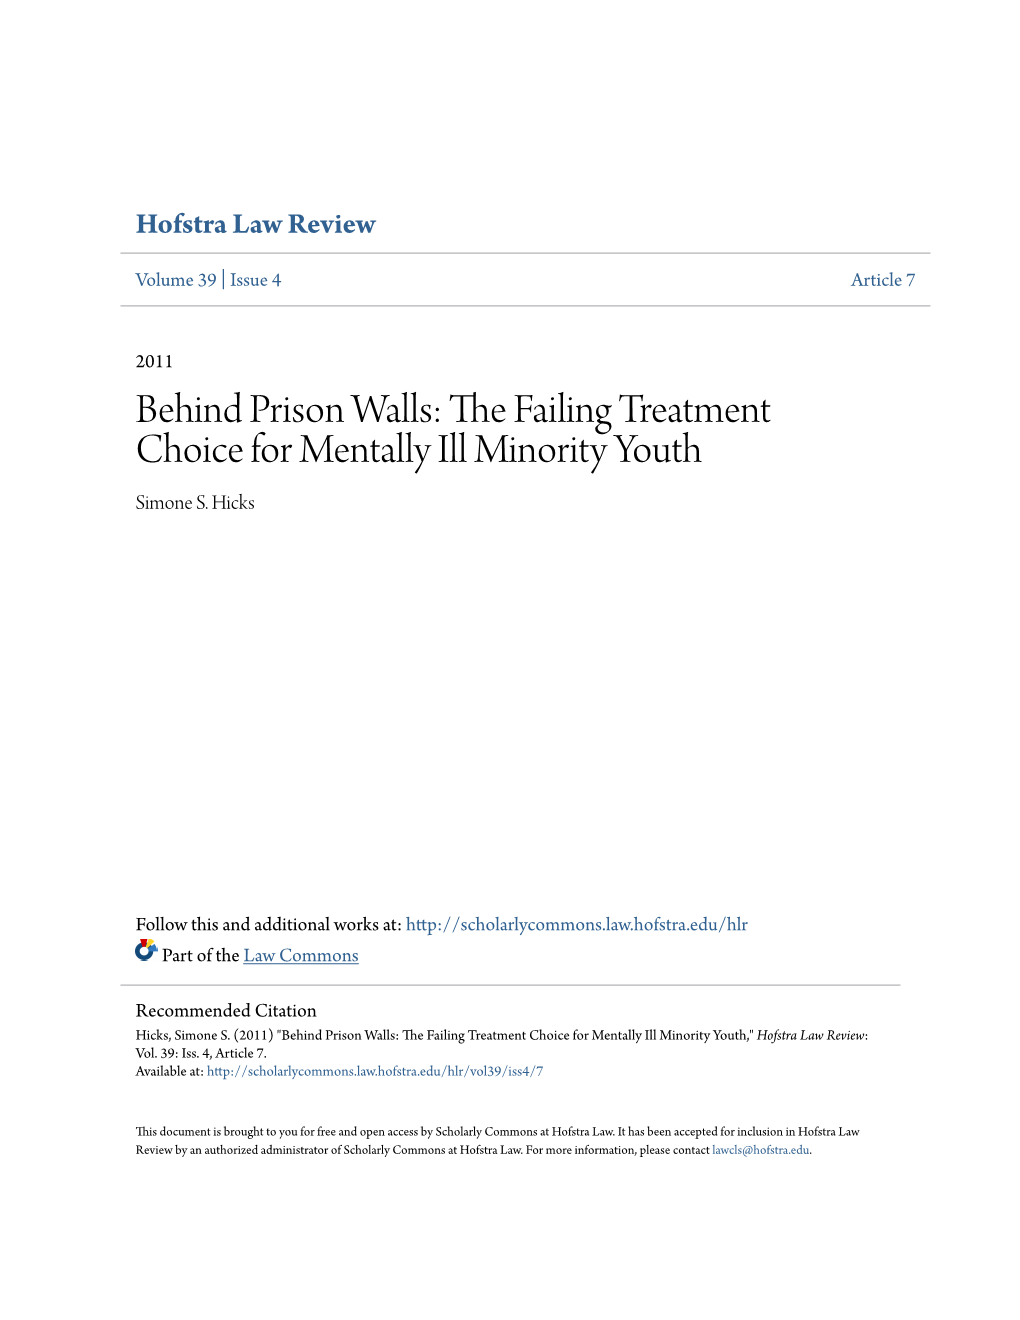 Behind Prison Walls: the Failing Treatment Choice for Mentally Ill Minority Youth